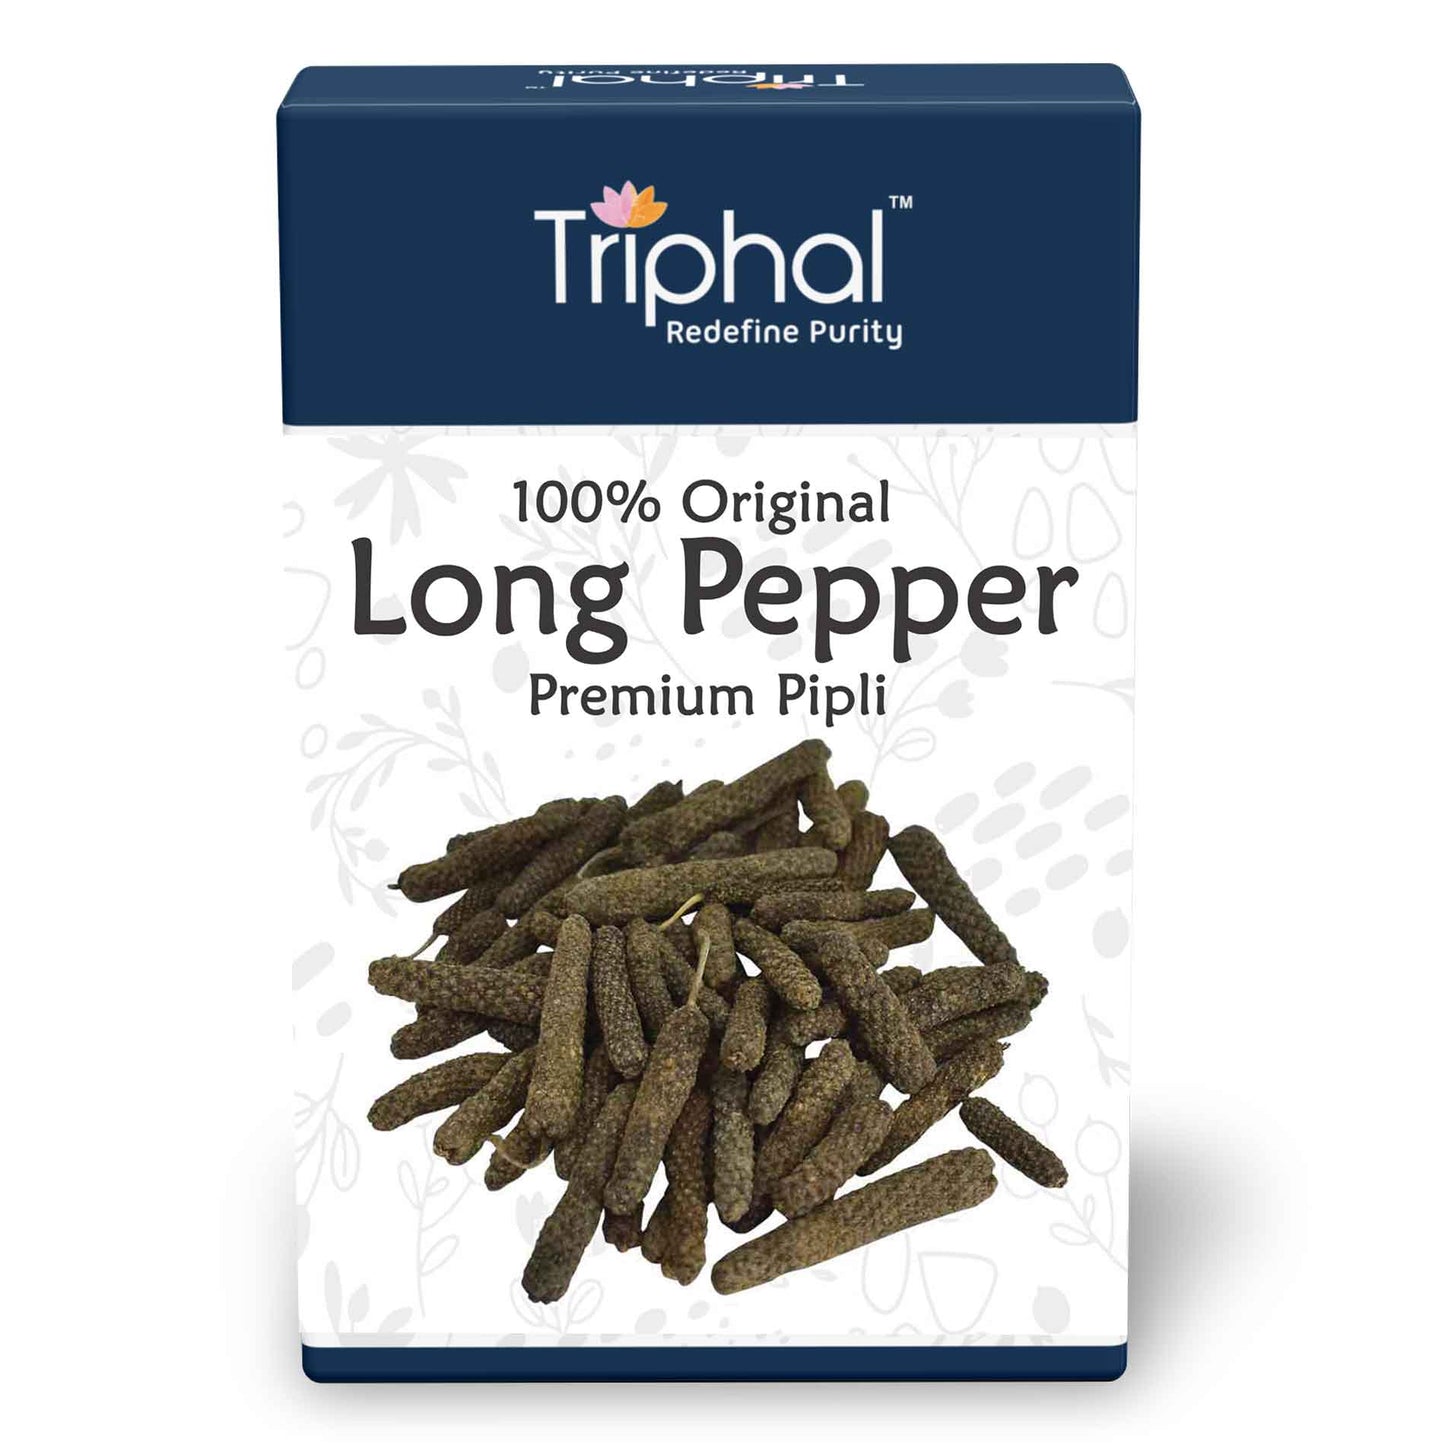 Long Pepper (Pipali/Pipal Badi) by Triphal - a traditional Indian spice for culinary and remedial use.